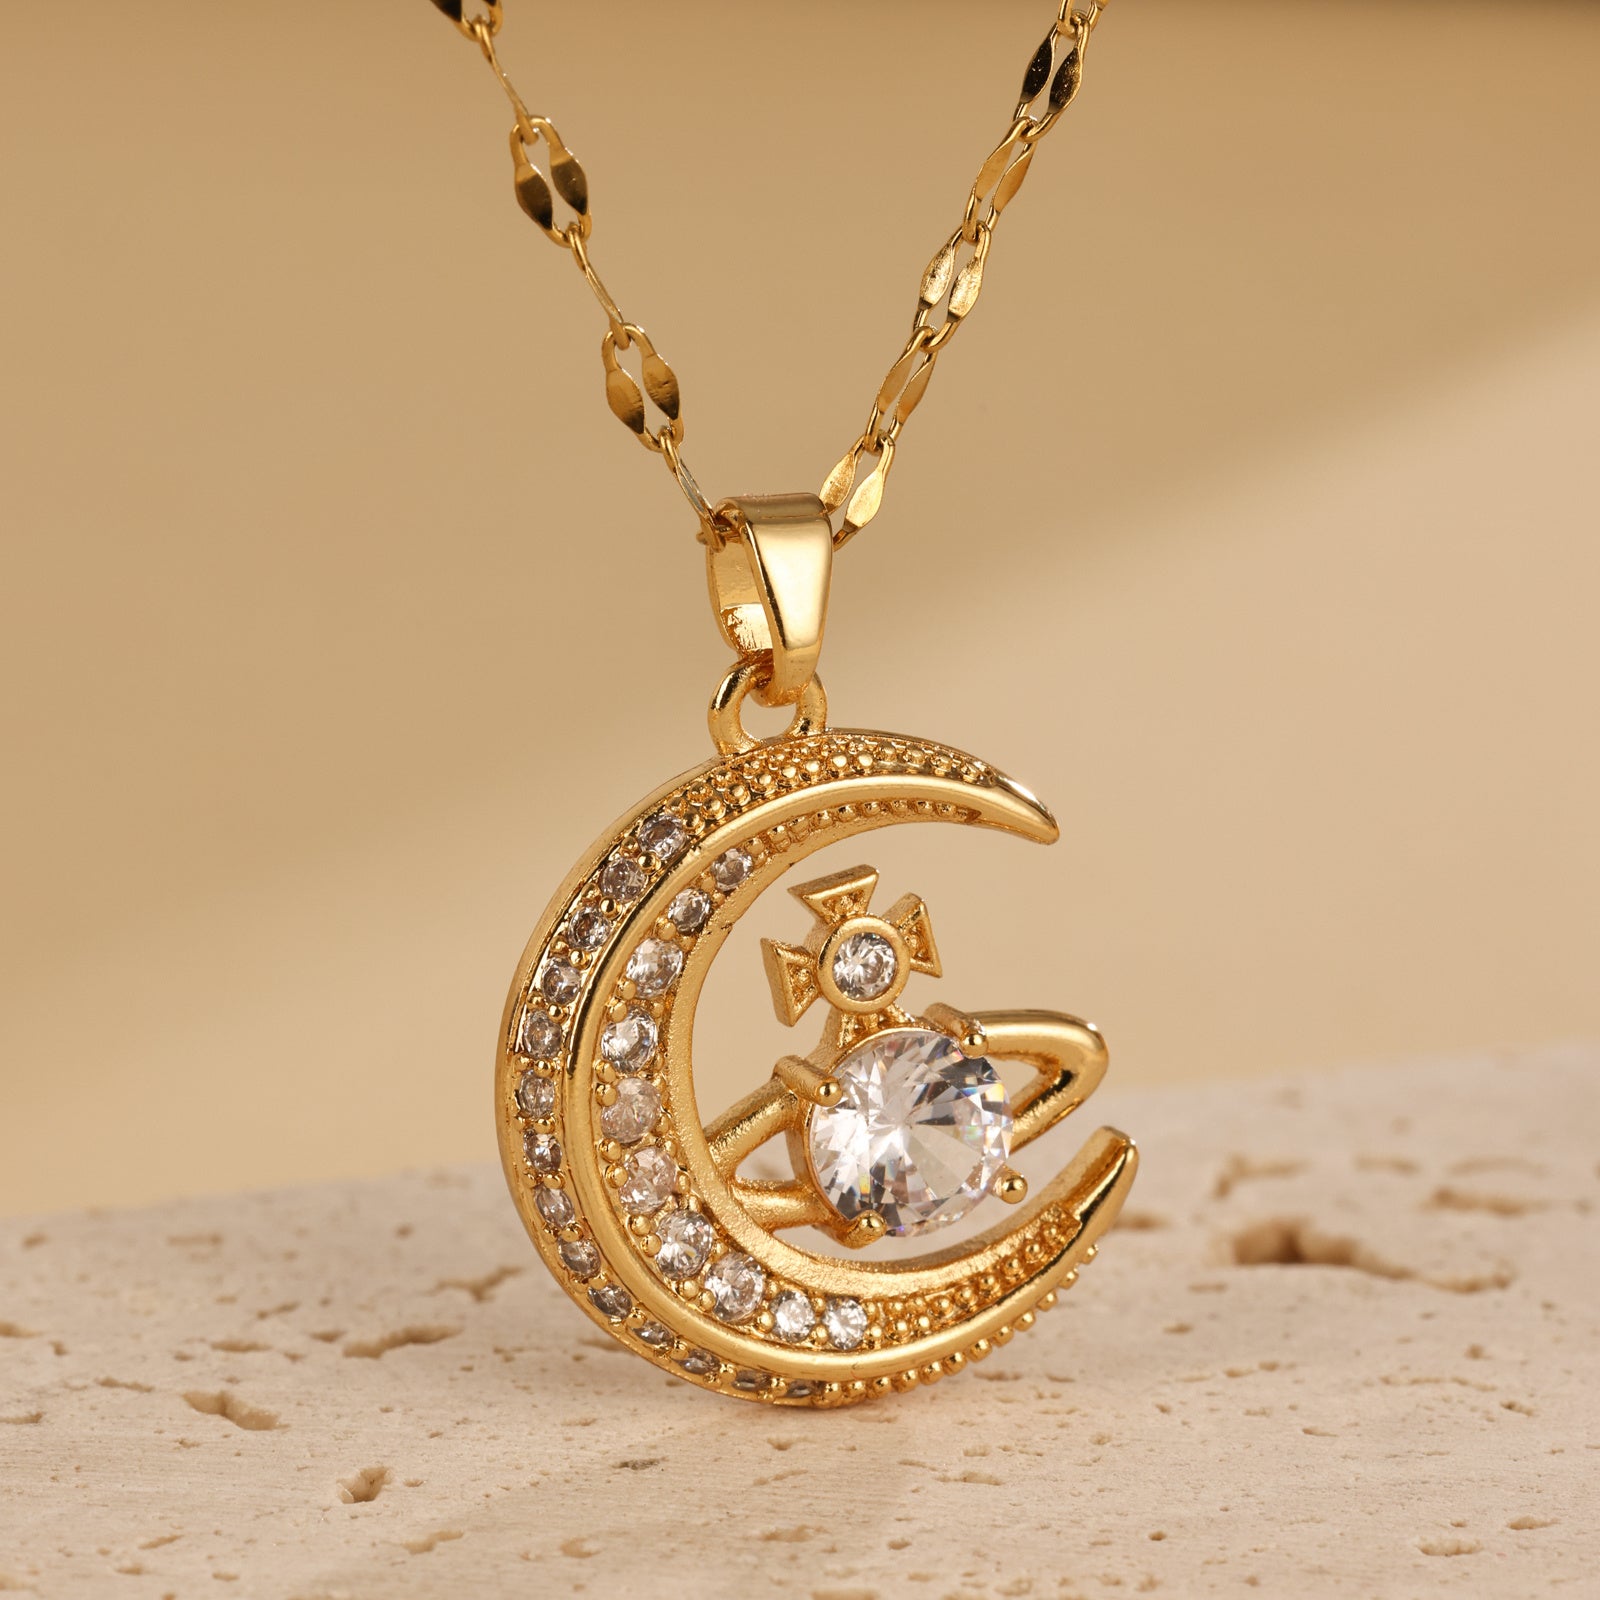 Korean Version Of Moon Planet Necklace For Women With High-end Design, Personalized And Versatile Zirconia Pendant Neck Chain